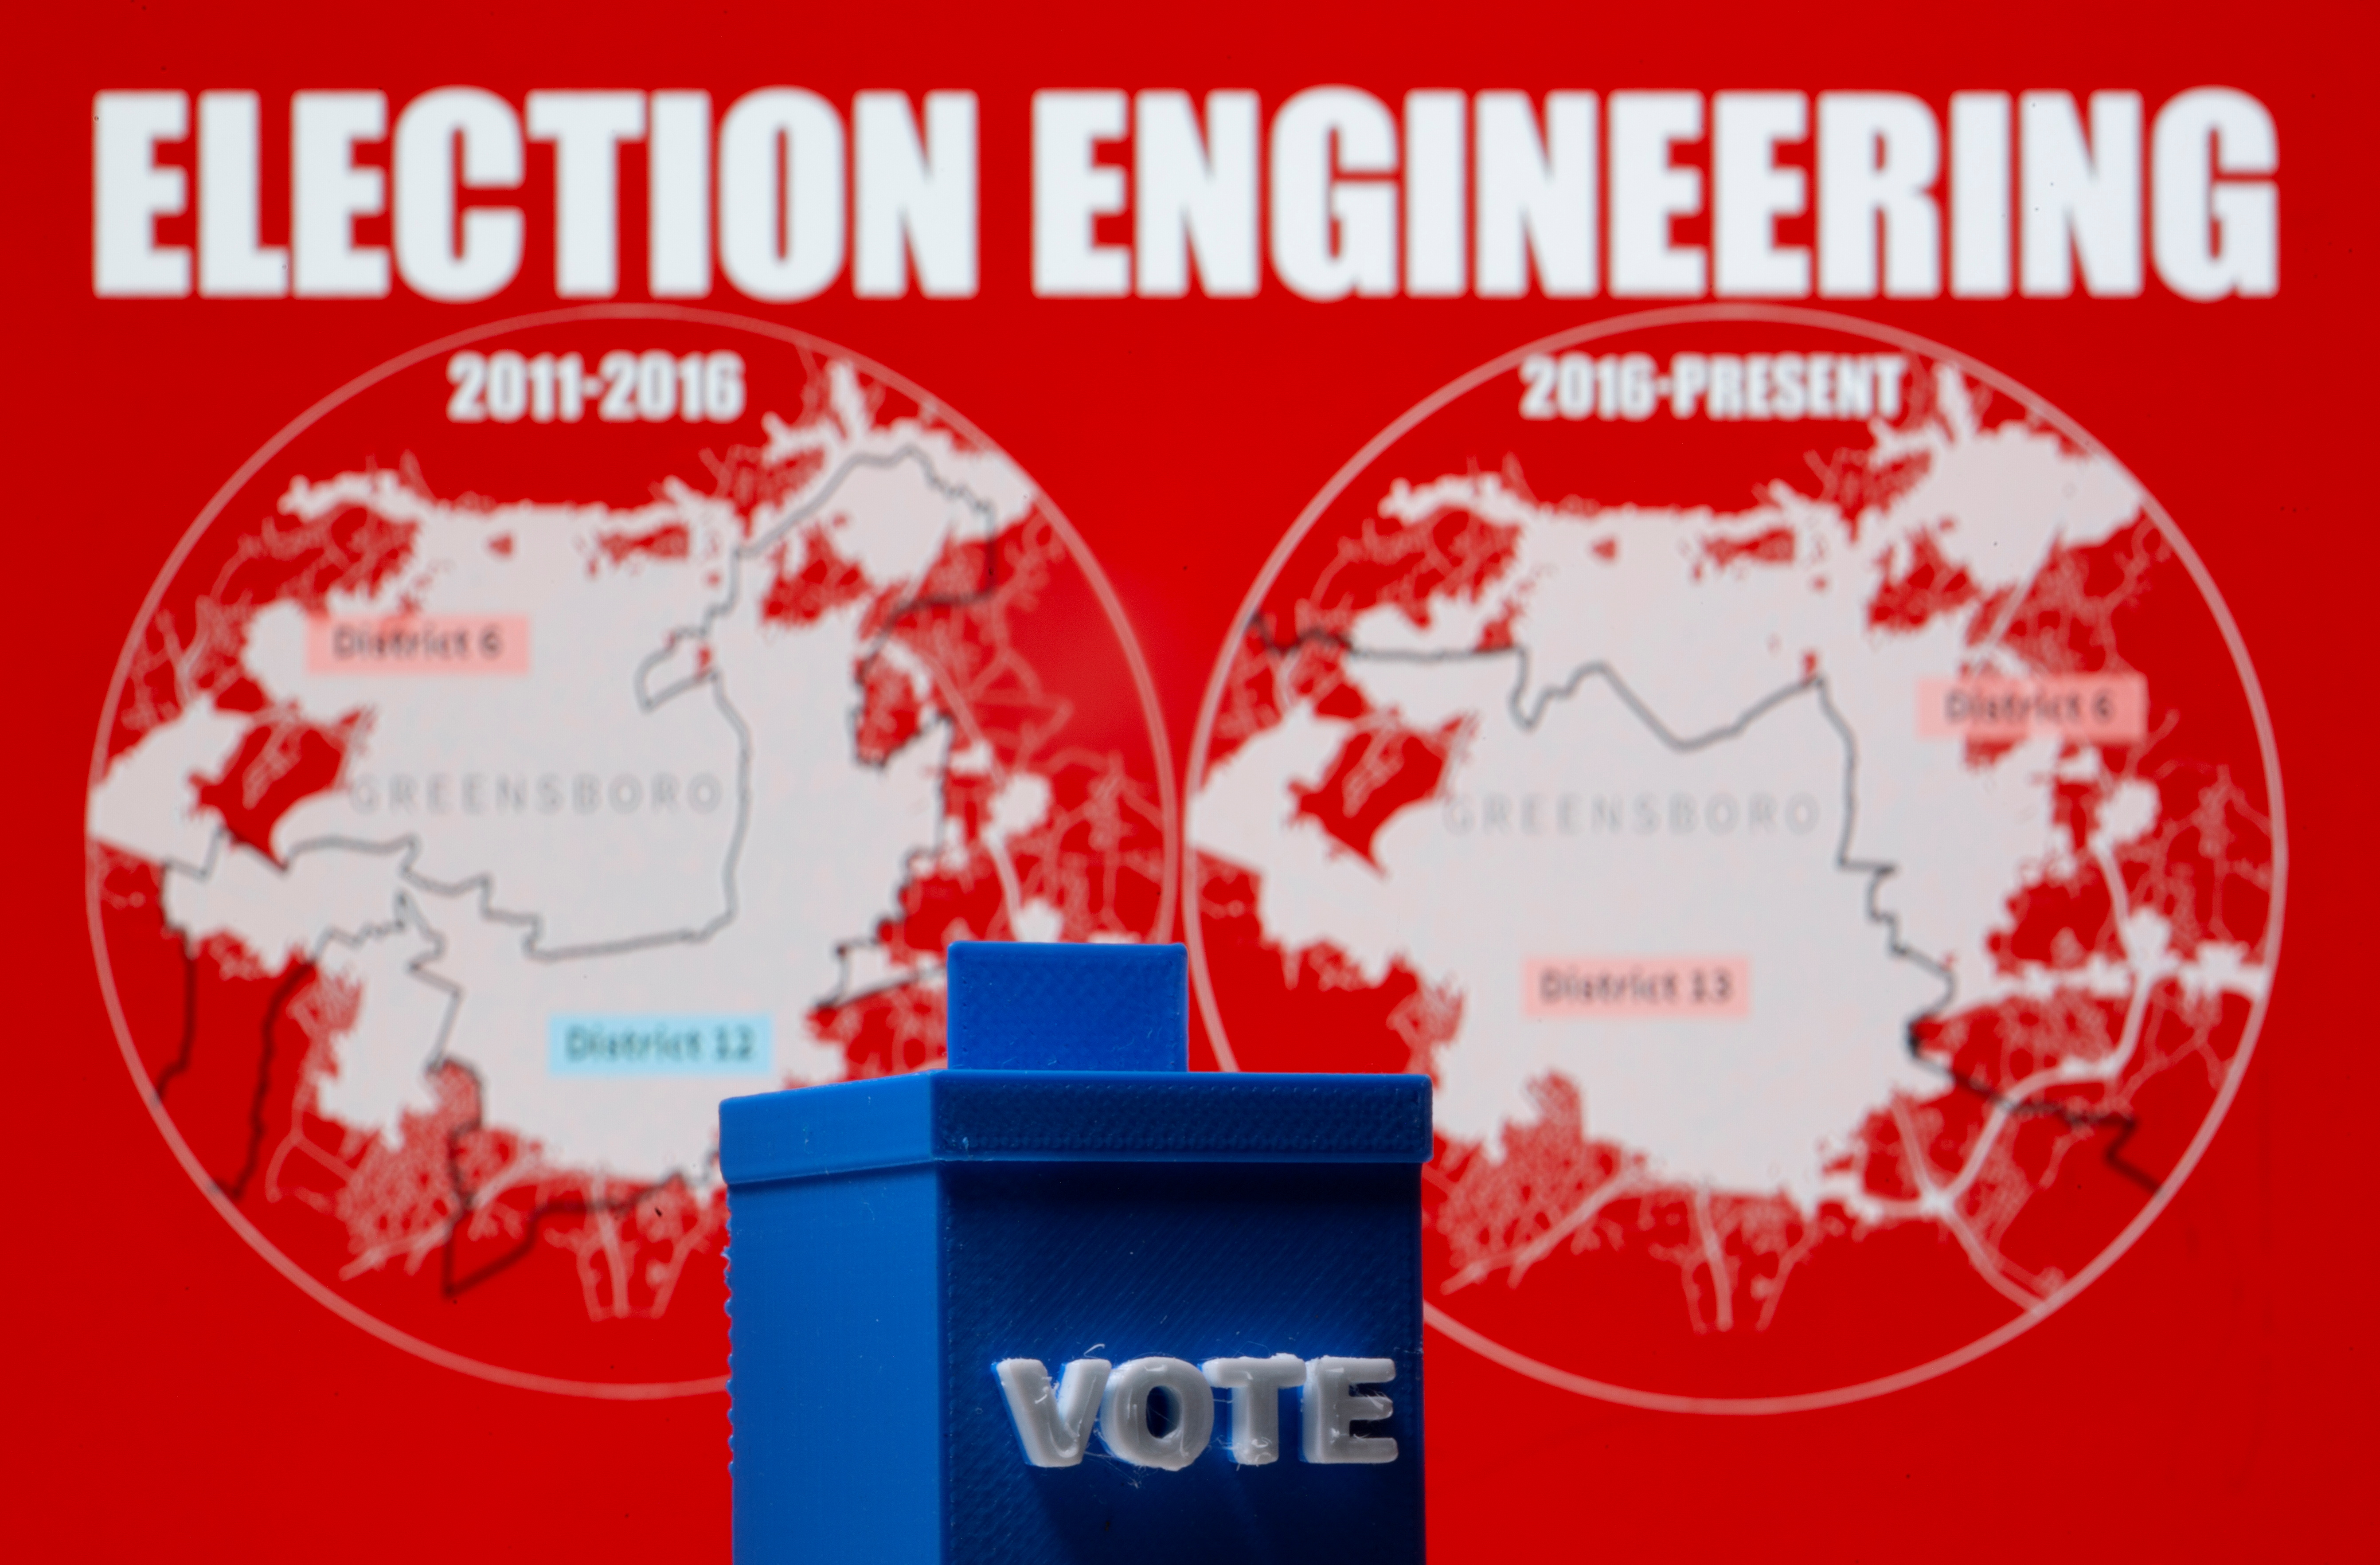 A 3D printed ballot box is seen in front of displayed North Carolina district maps in this illustration